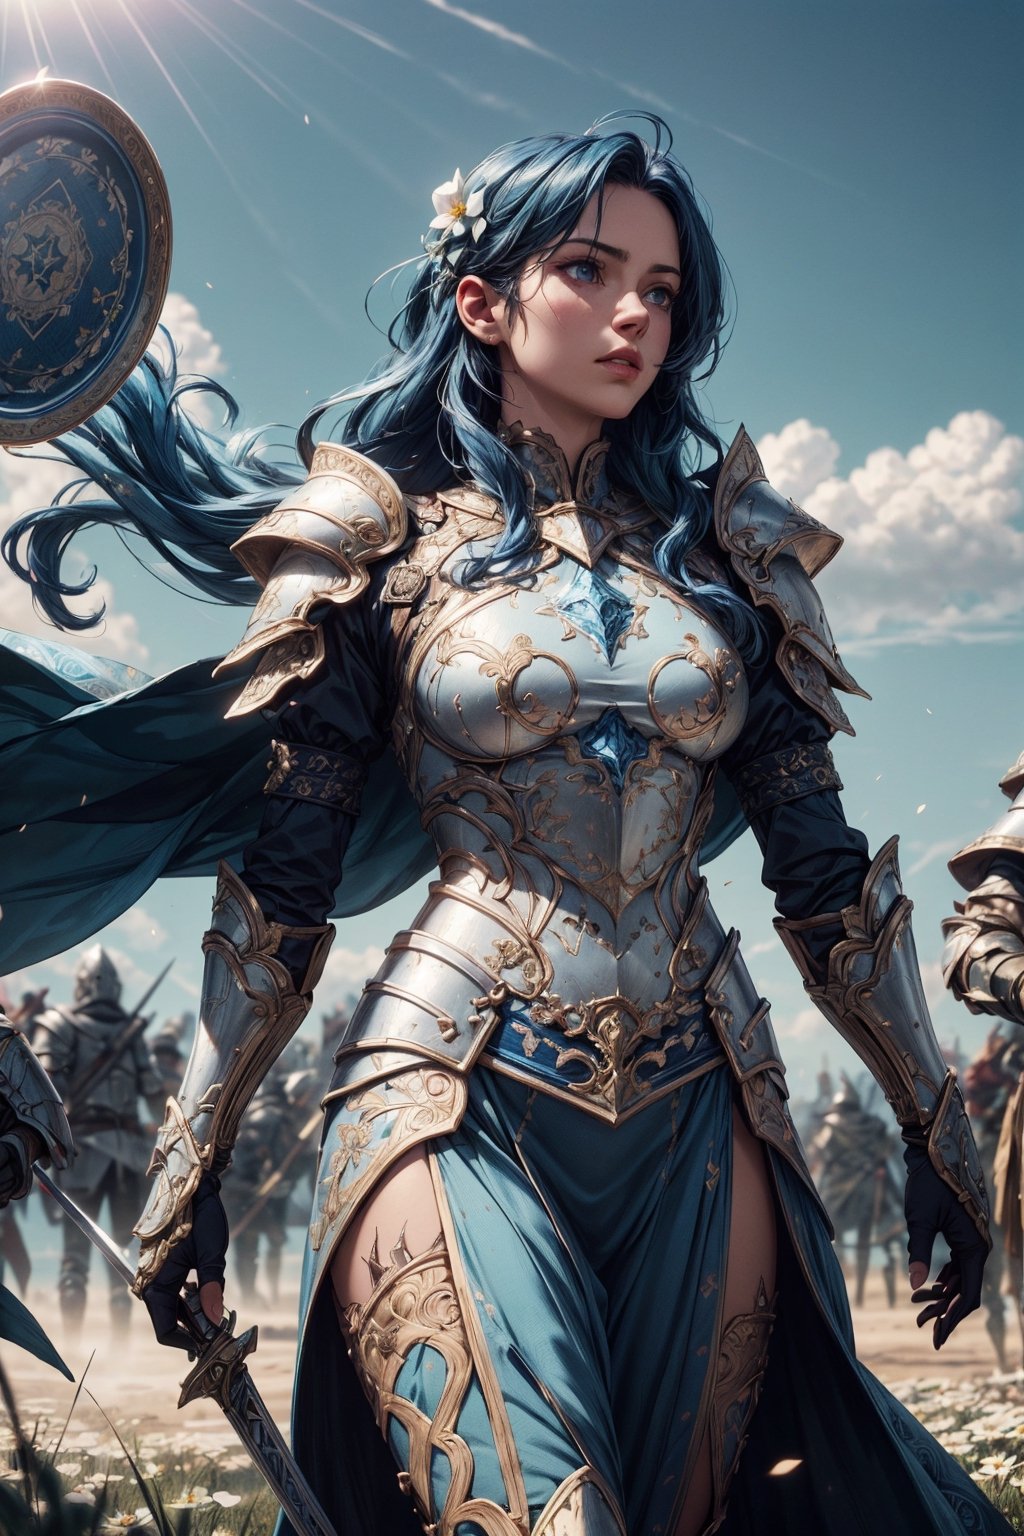 (4k), (masterpiece), (best quality),(extremely intricate), (realistic), (sharp focus), (cinematic lighting), (extremely detailed),

A girl knight in shiny white plate armor with cerulean blue embroideries, walking across a battlefield, her sword raised in defiance. The sun is shining through her flowing long blue hair giving the scene a slightly blue tint.

,flower4rmor, flower warrior armor,Flower
,matwaretech, scifi, blue hues
,stealthtech
,glyphtech